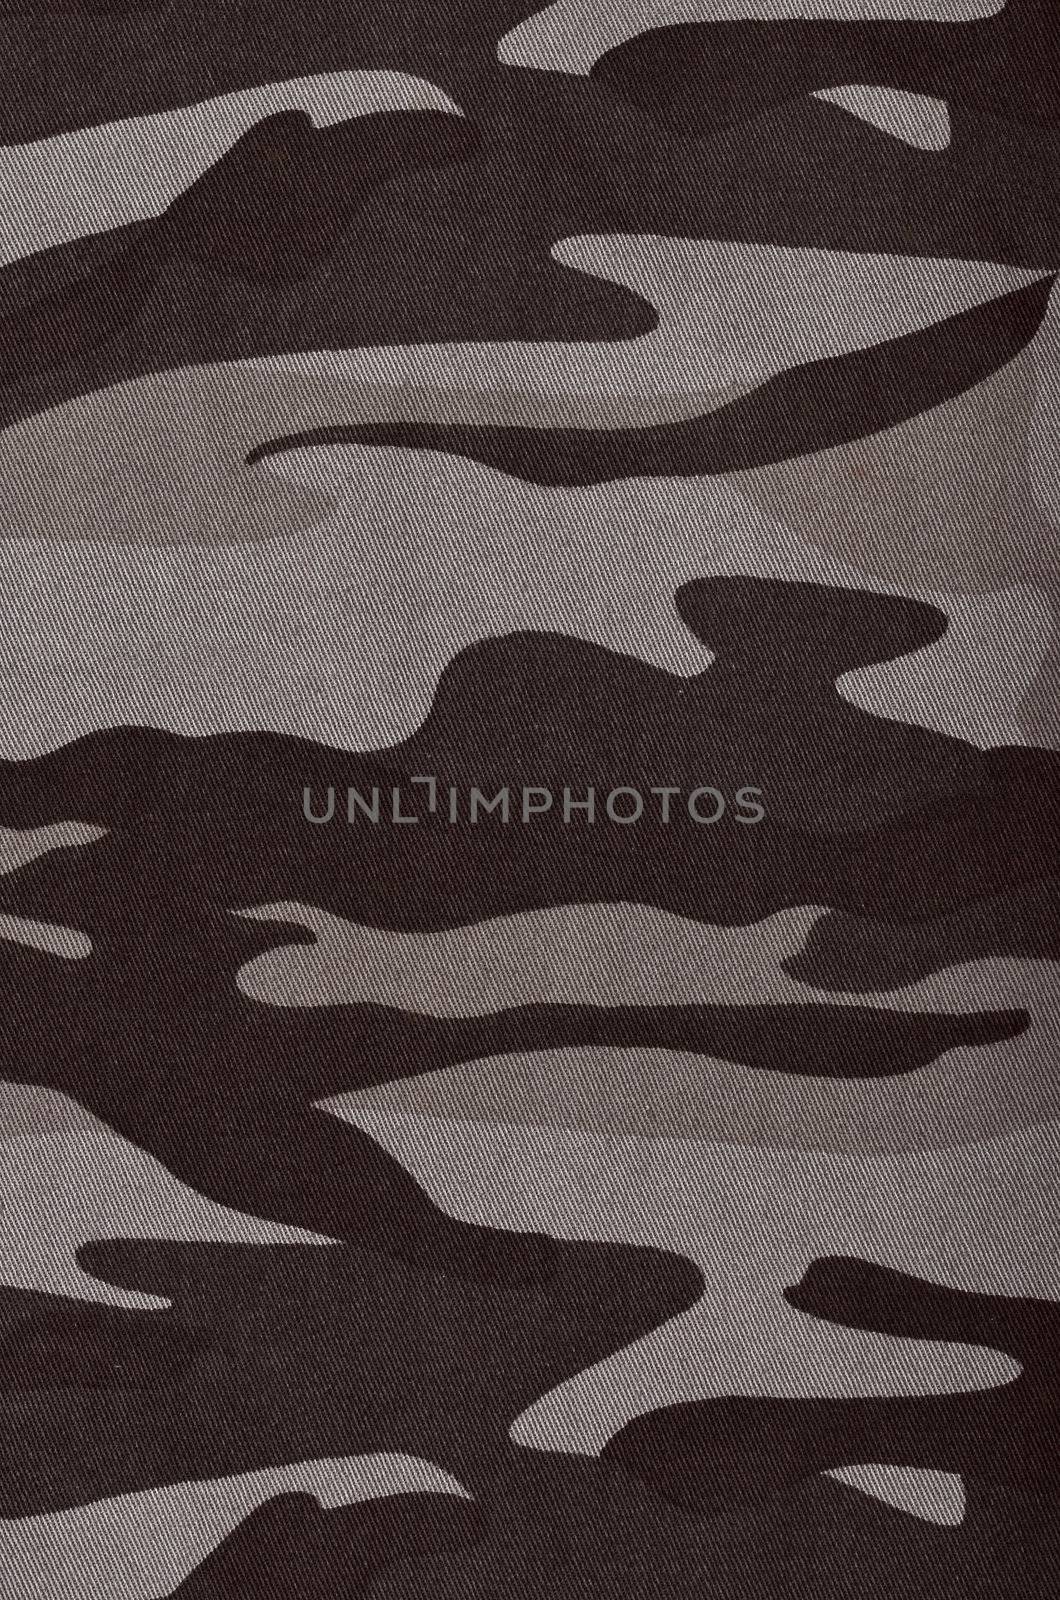 Close up camouflage fabric in a vertical orientation by DNKSTUDIO